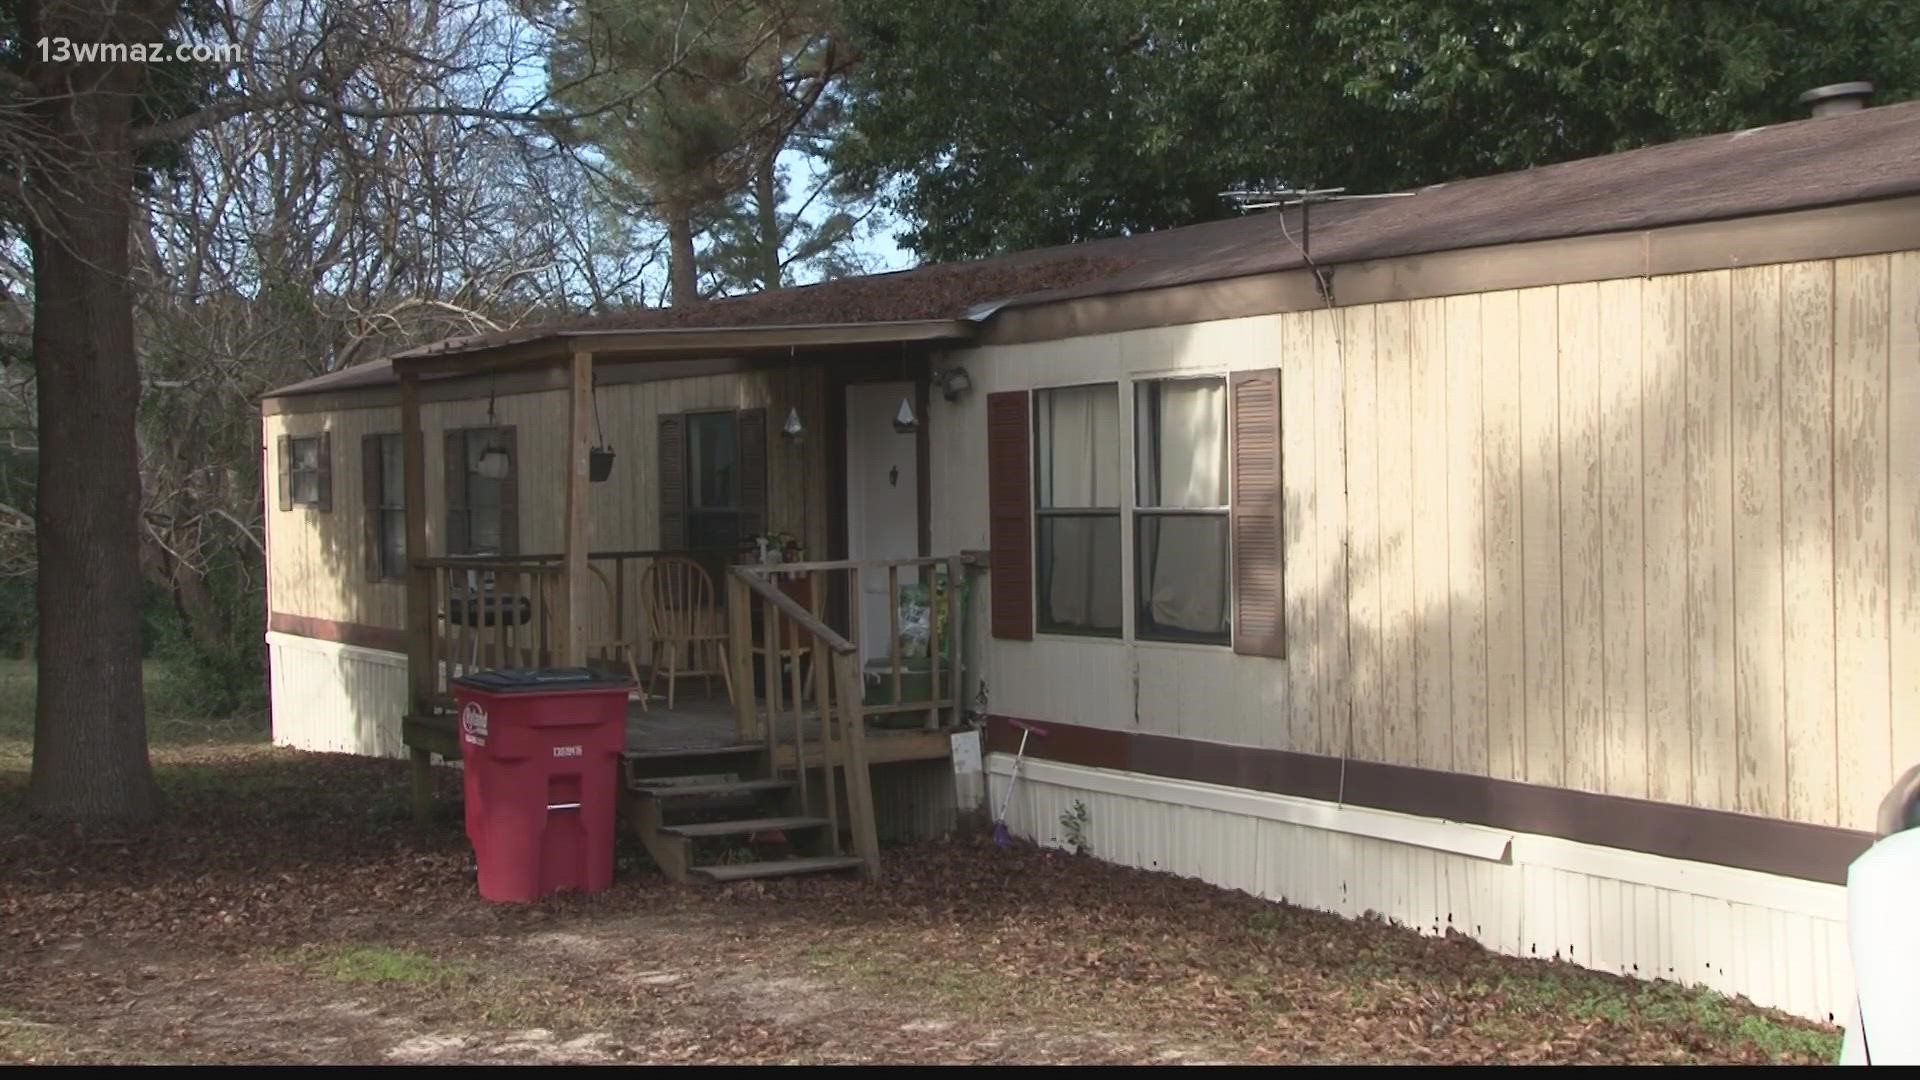 In the last 15 years 61% of Georgia’s storm deaths happened in and around mobile homes.